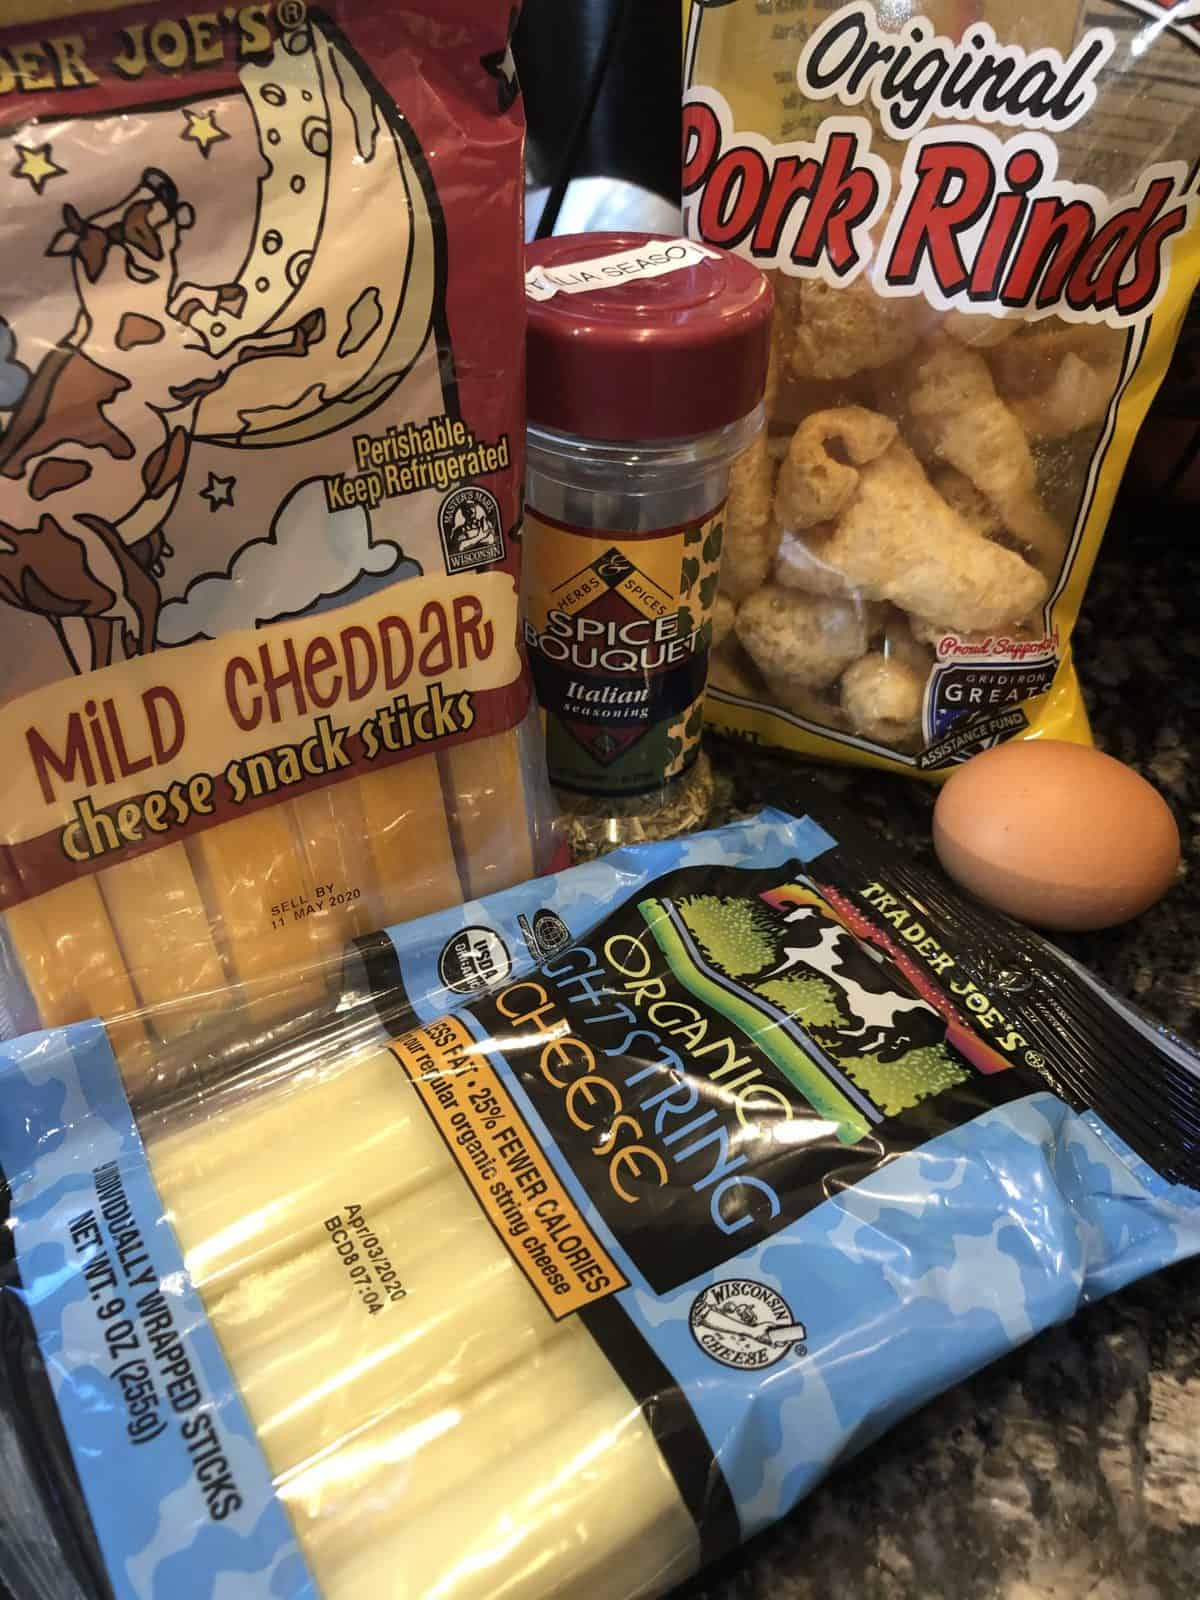 Ingredients for Low Carb Mozzarella sticks which includes a package of mild cheddar string cheese and Trader Joes Mozzarella string cheese and a bag of pork rinds and one brown egg and Italian seasoning